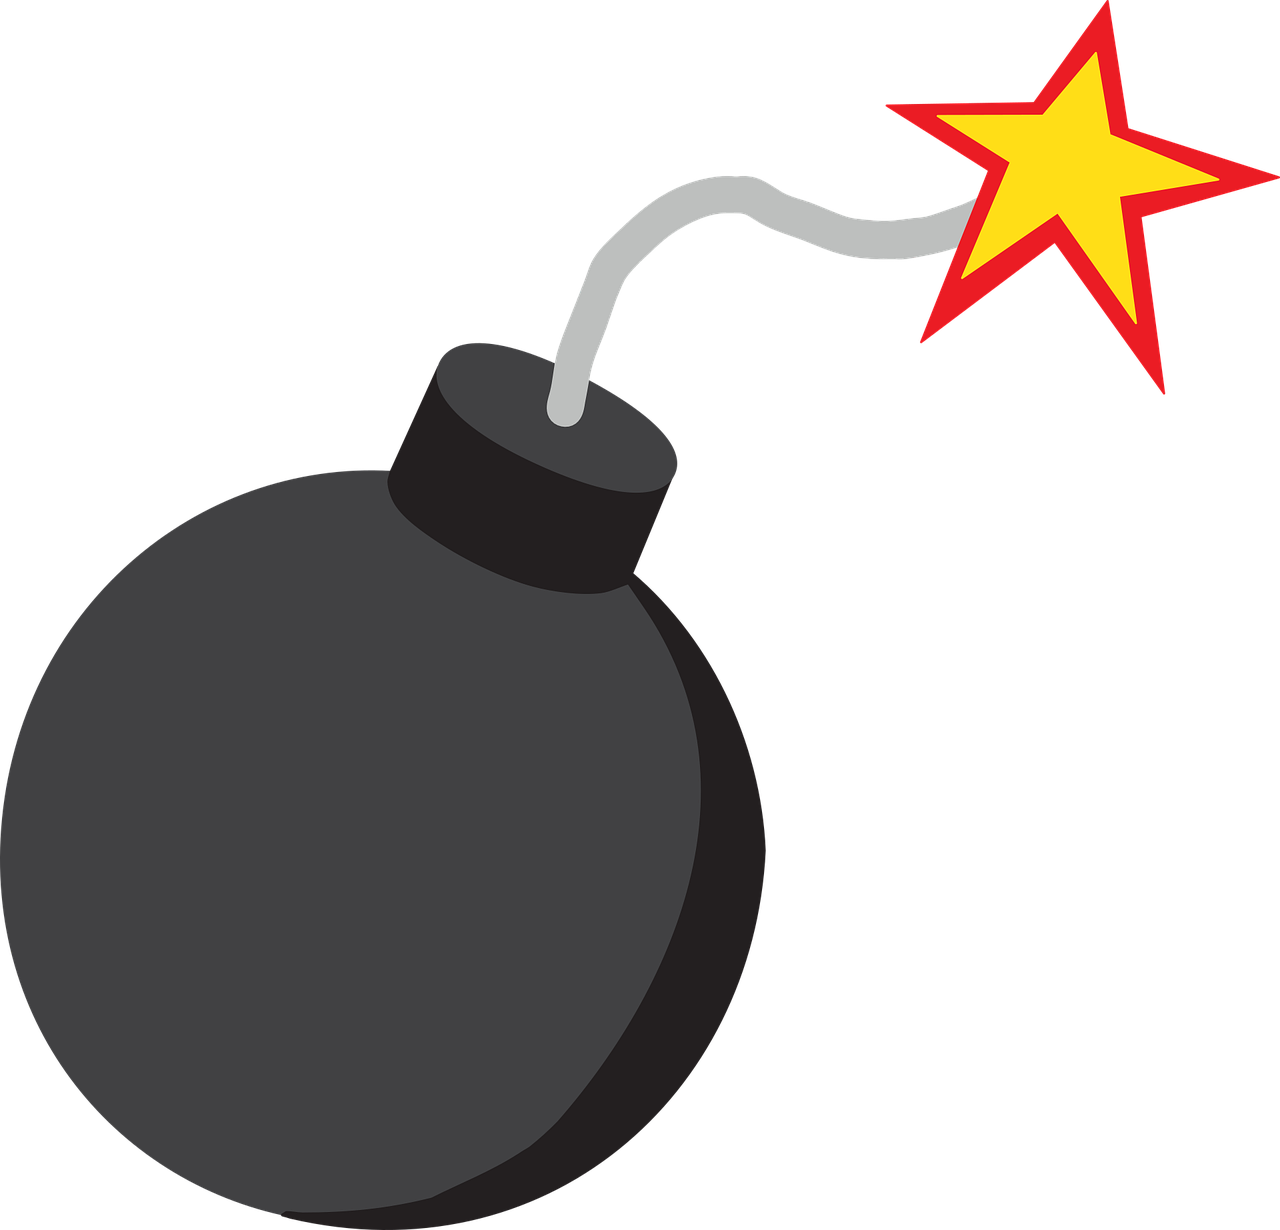 a bomb with a star on it, inspired by Irvin Bomb, pokemon military drill, dark. no text, casting fireball, black